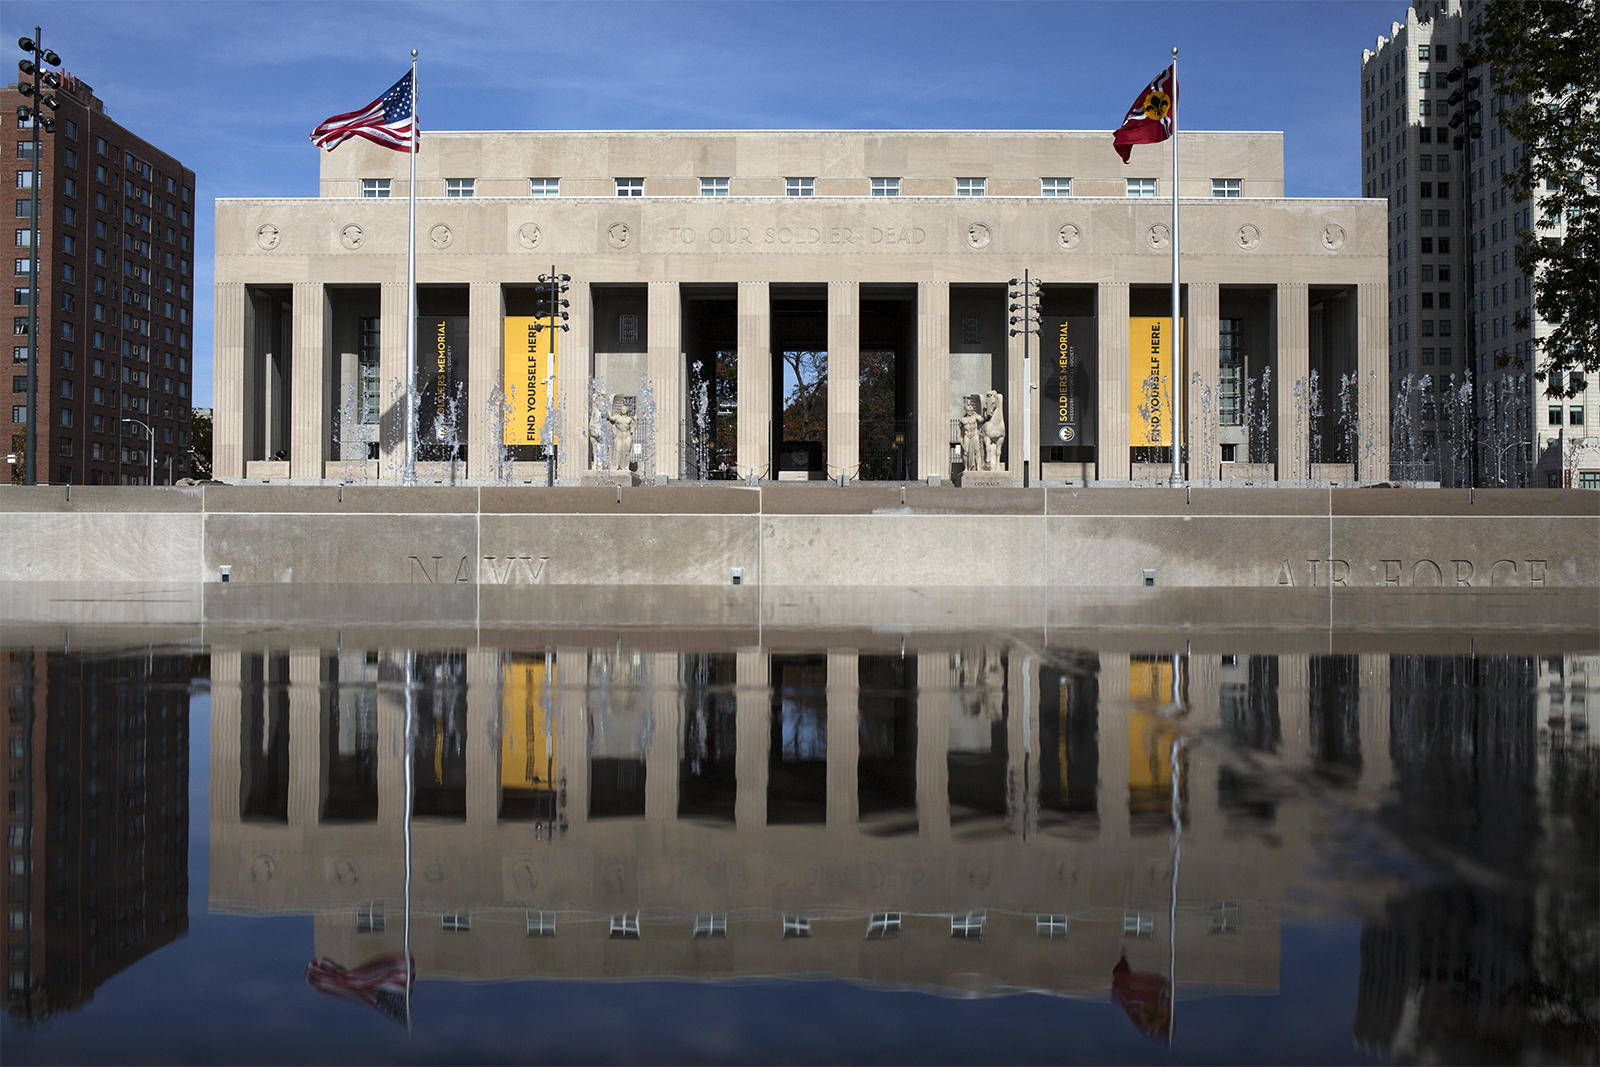 Soldiers Memorial reopens in downtown St. Louis after major renovation, inside and out | St ...